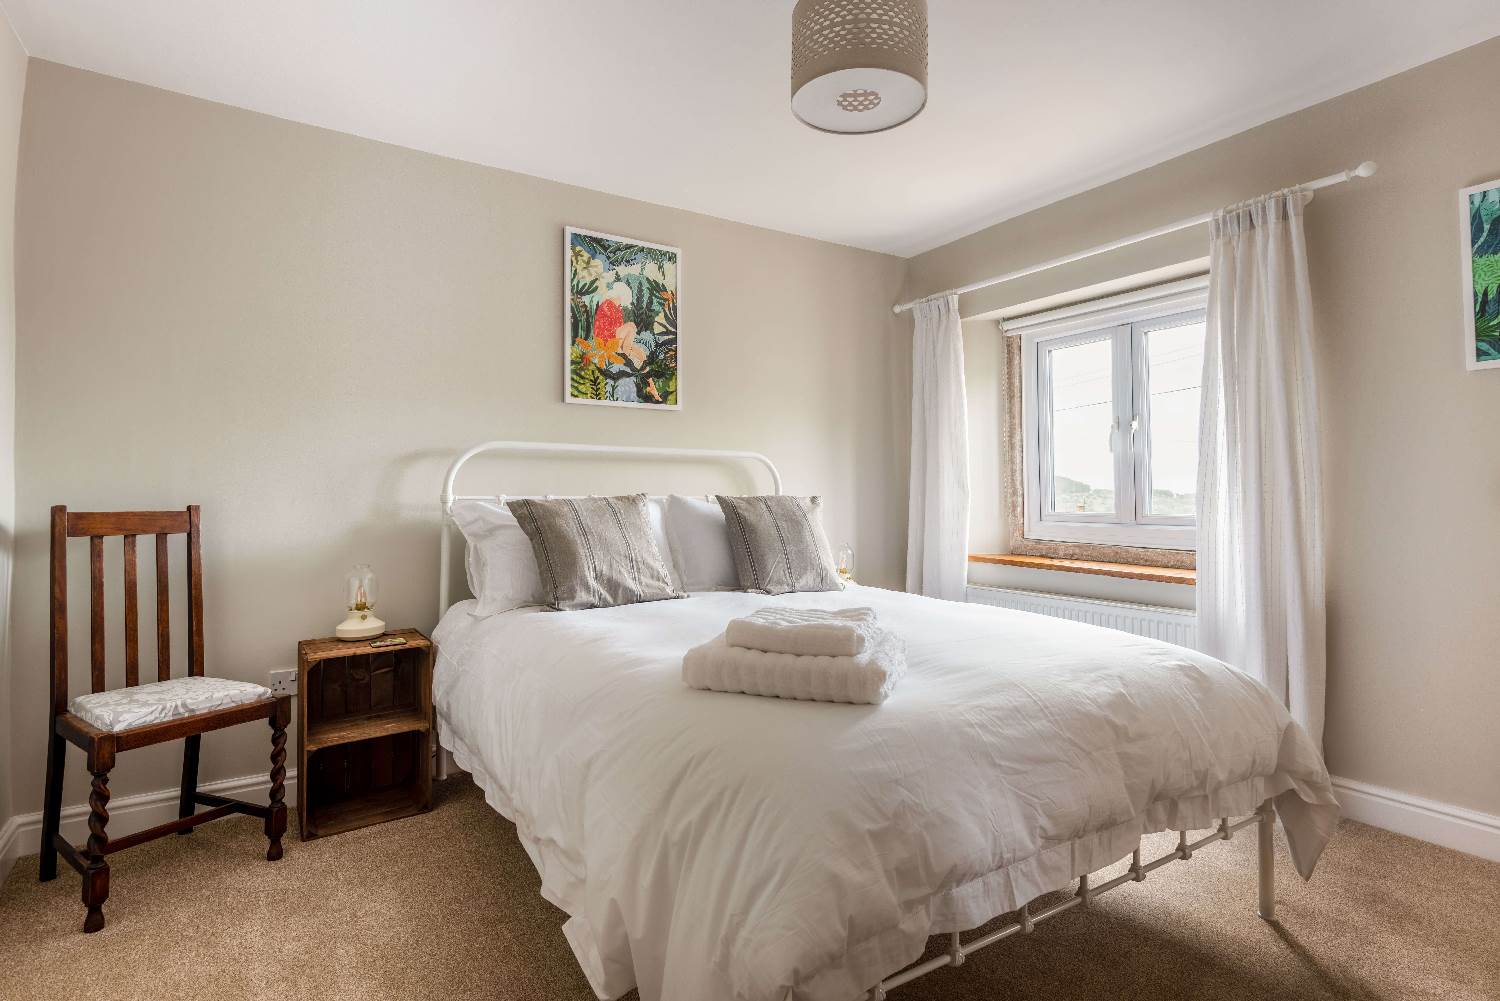 Eight The Green has a well-proportioned bedroom, with views to the village and countryside beyond